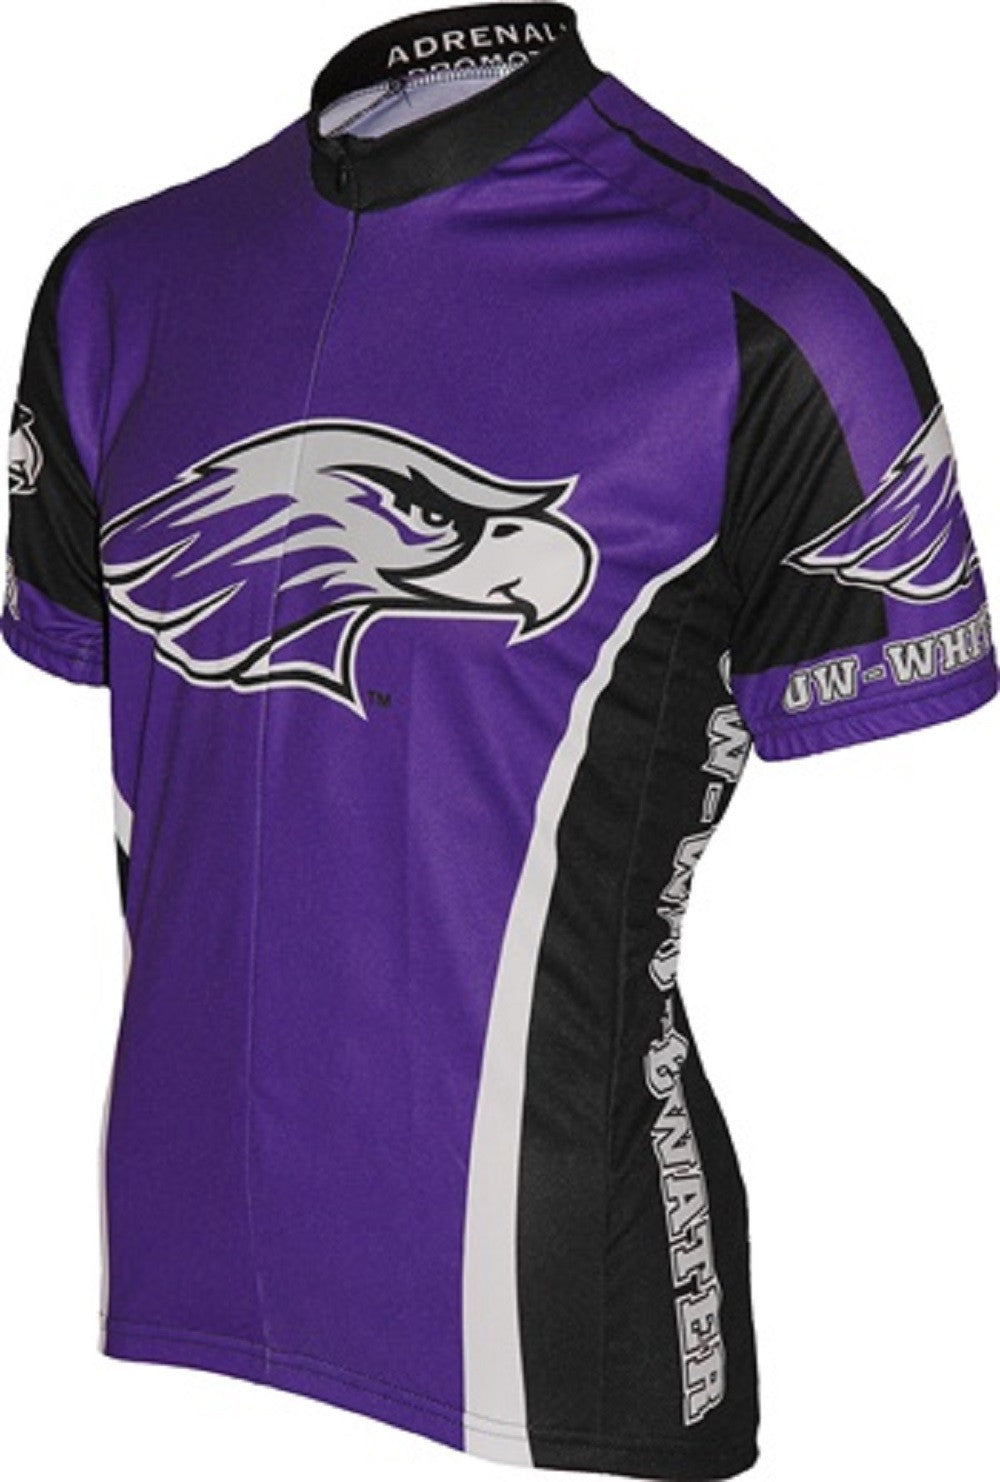 Wisconsin Whitewater Men's Cycling Jersey 3XL